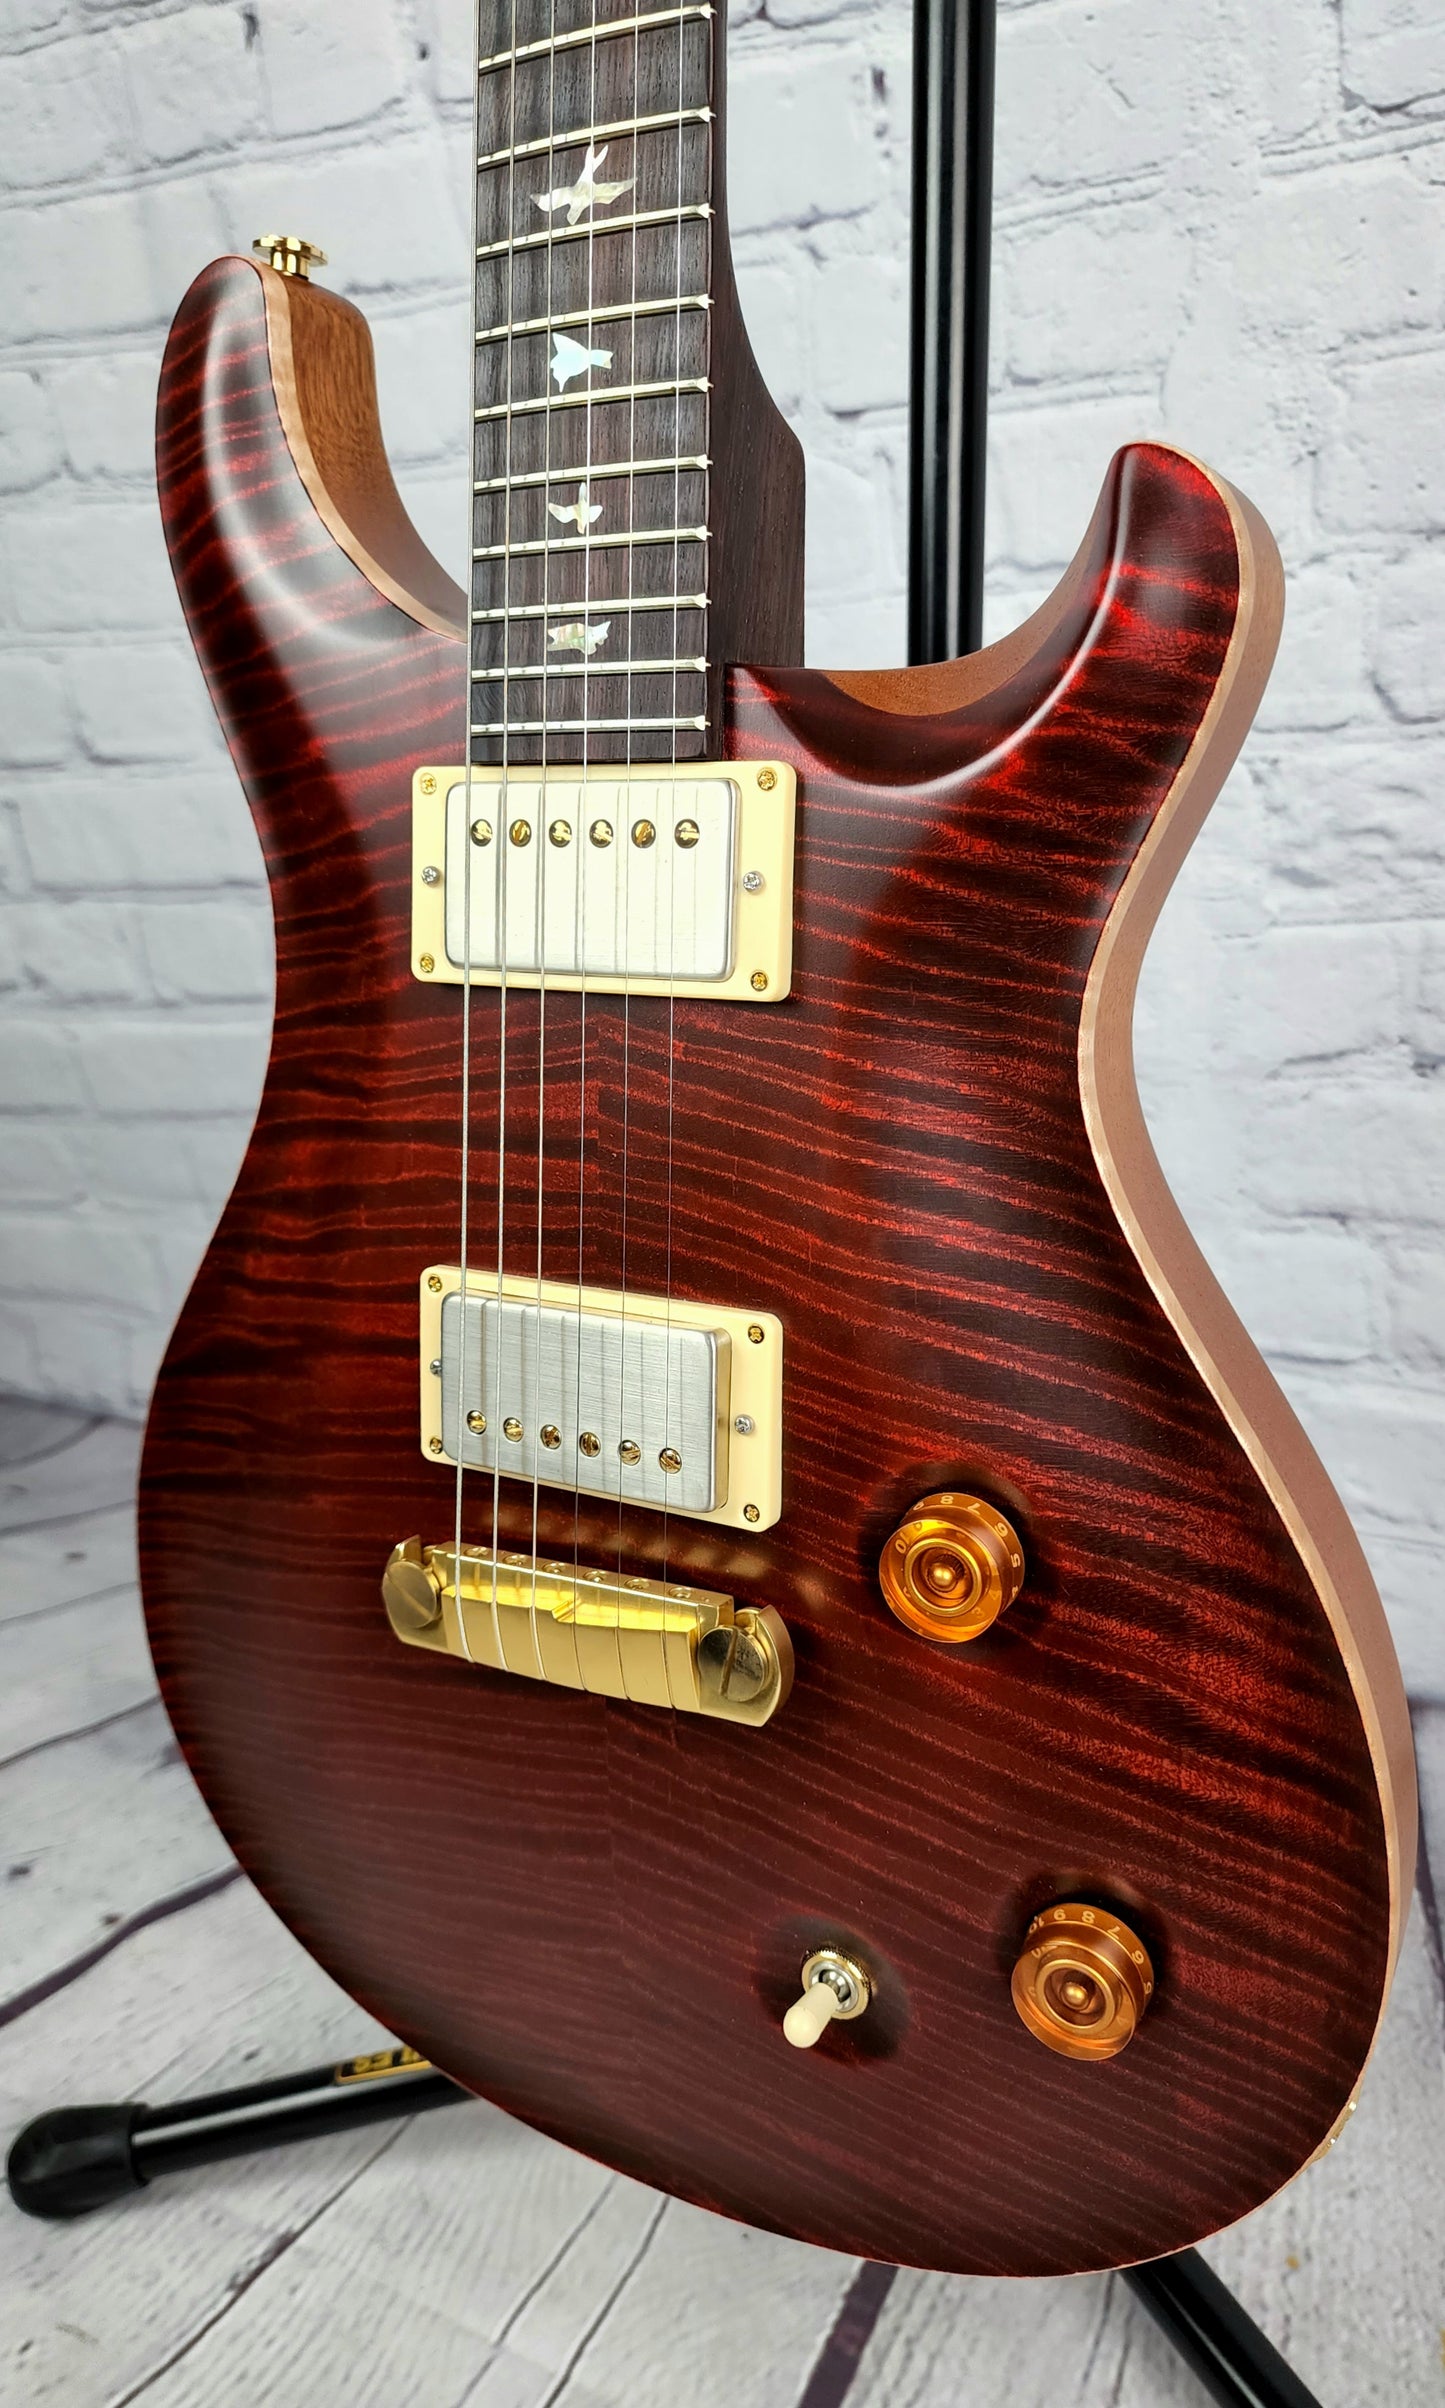 USED Paul Reed Smith PRS 2004 Modern Eagle I Brazilian Rosewood Neck Collector's